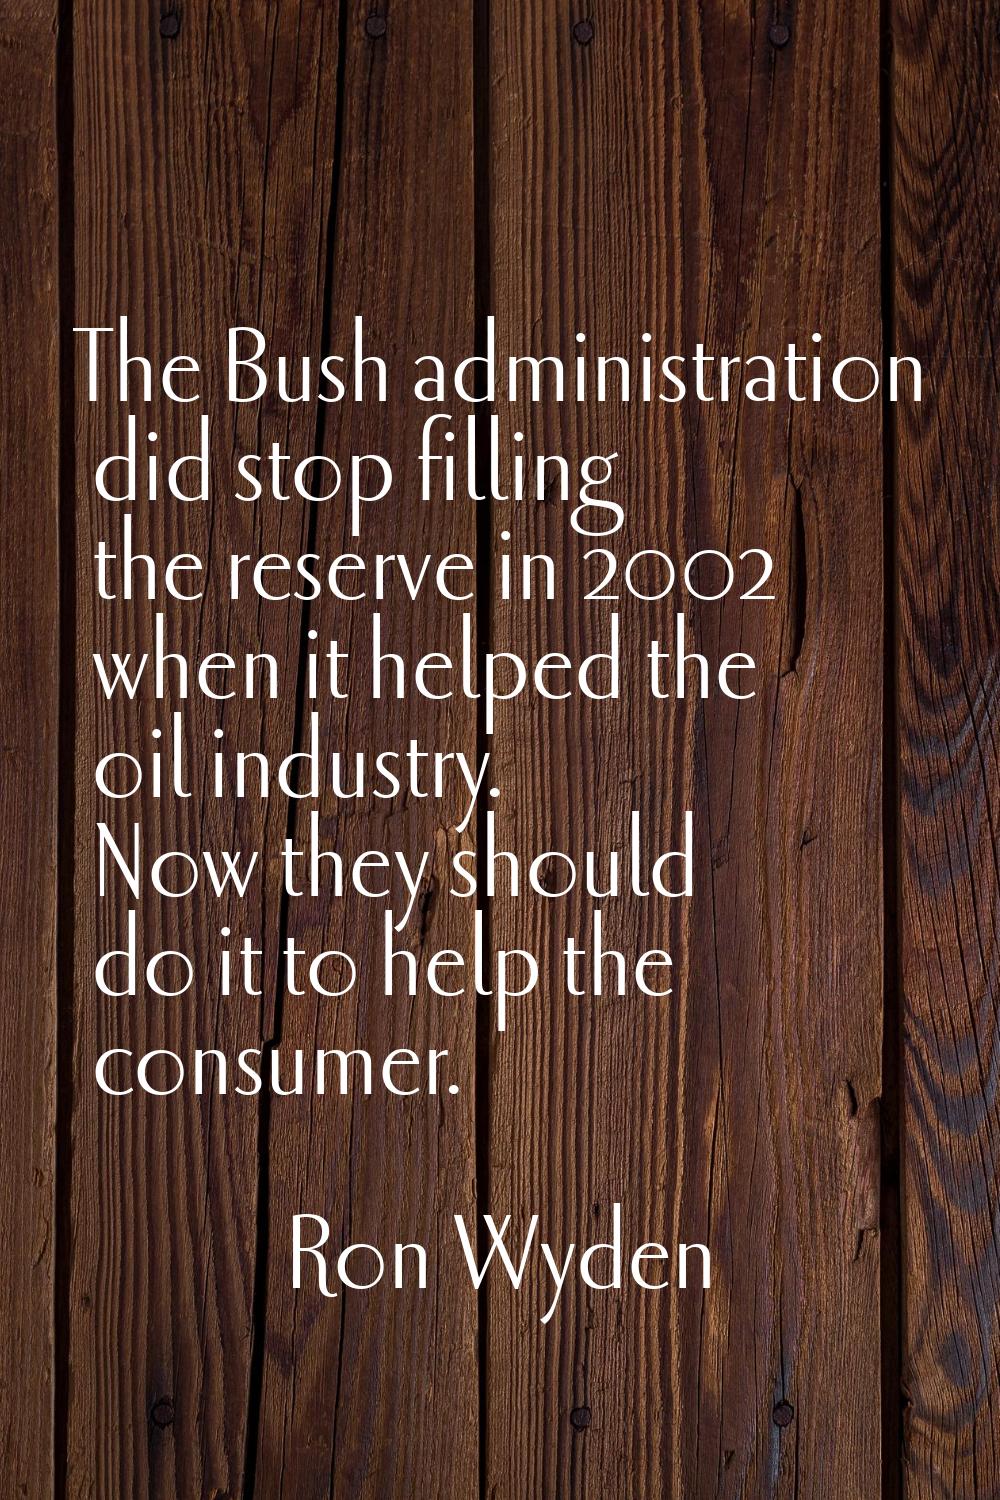 The Bush administration did stop filling the reserve in 2002 when it helped the oil industry. Now t